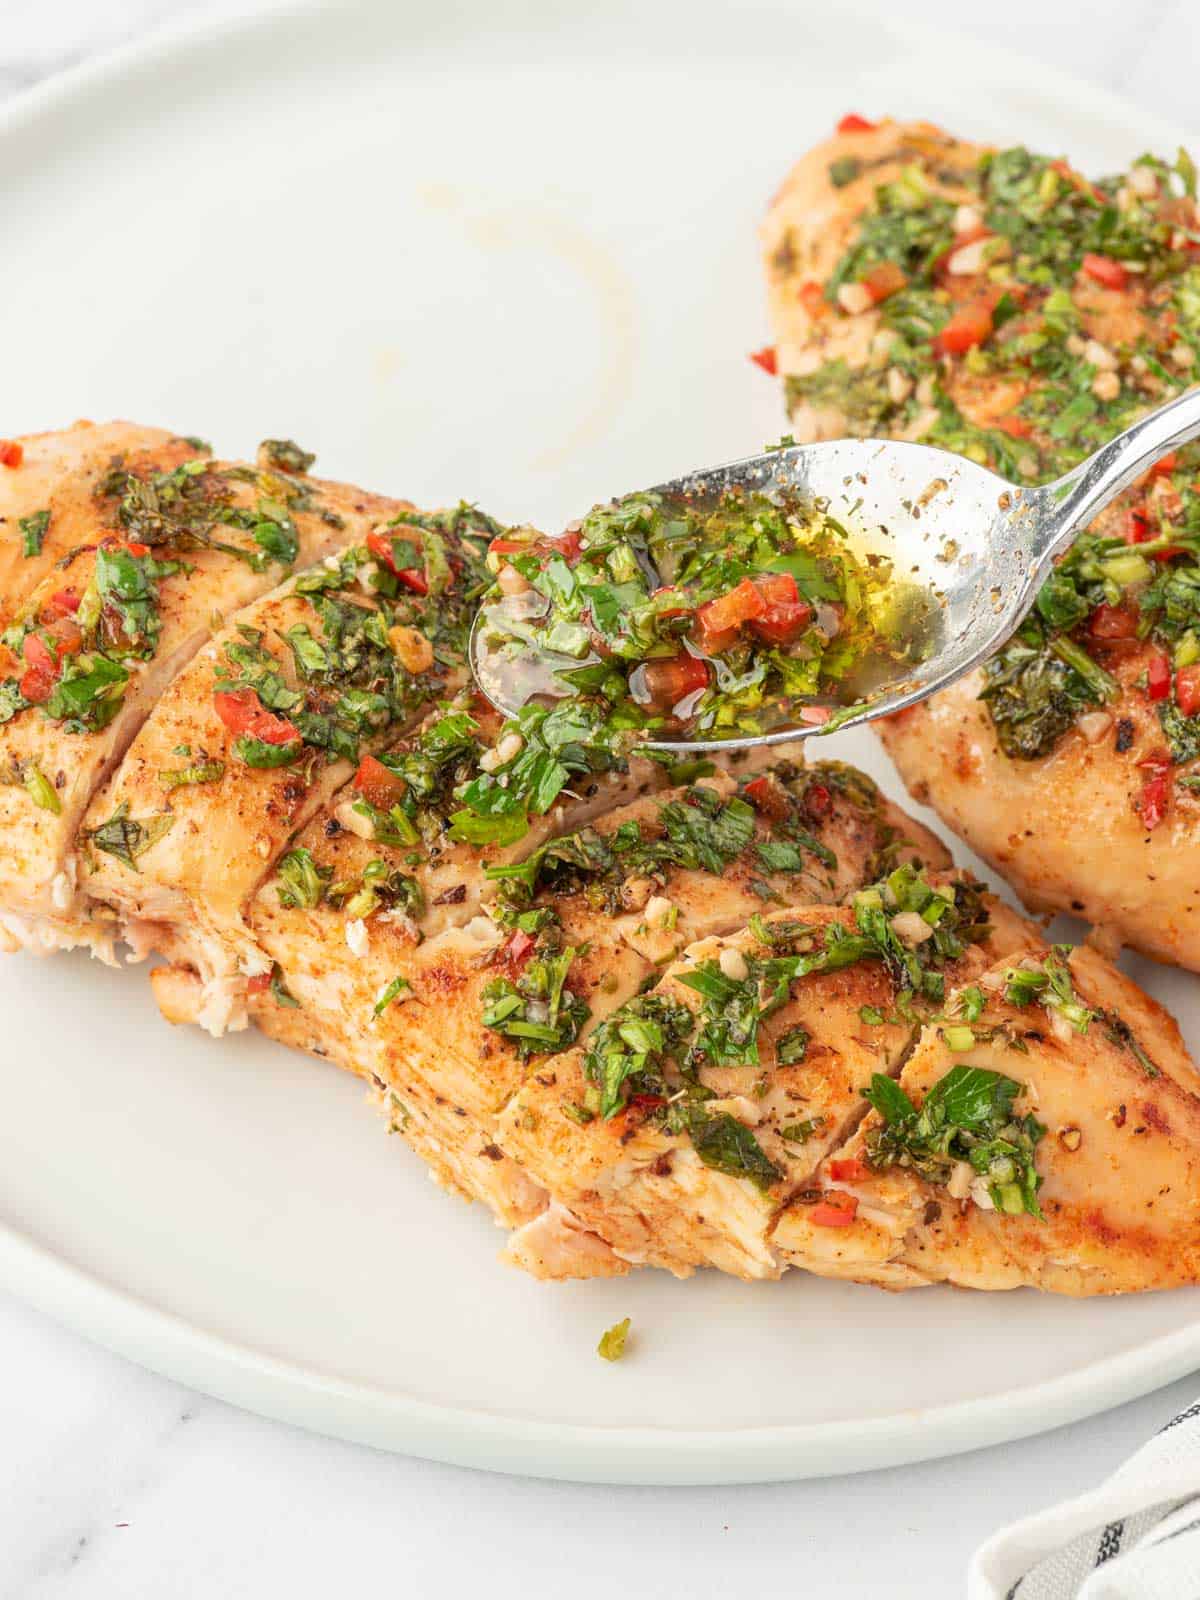 Drizzling chimichurri sauce on chicken breast.